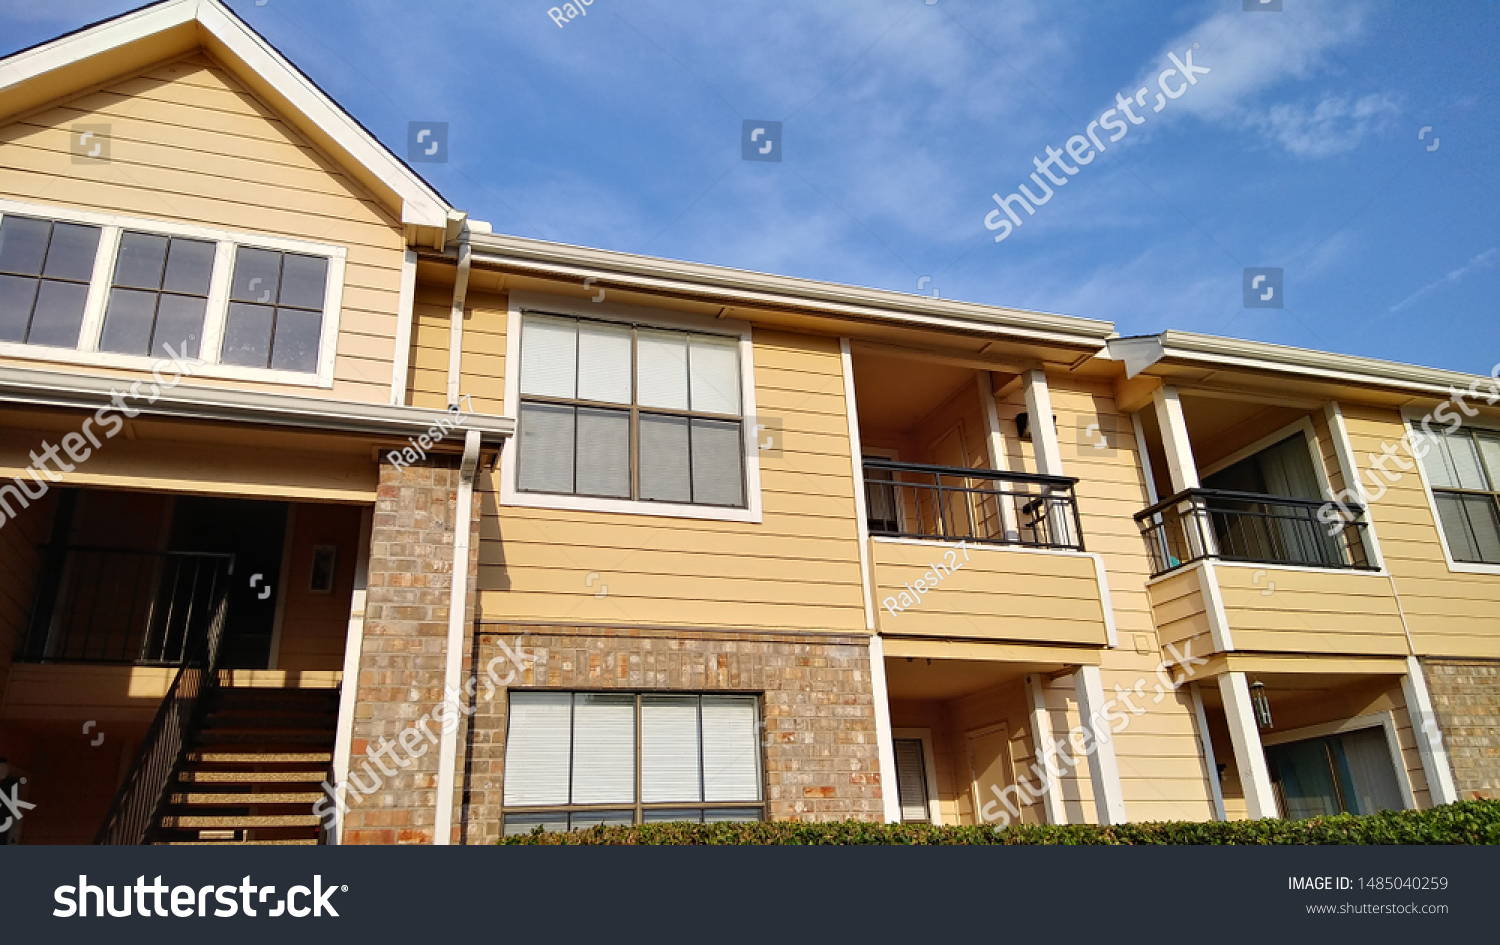 Apartment complex with outdoor and sky
 #1485040259